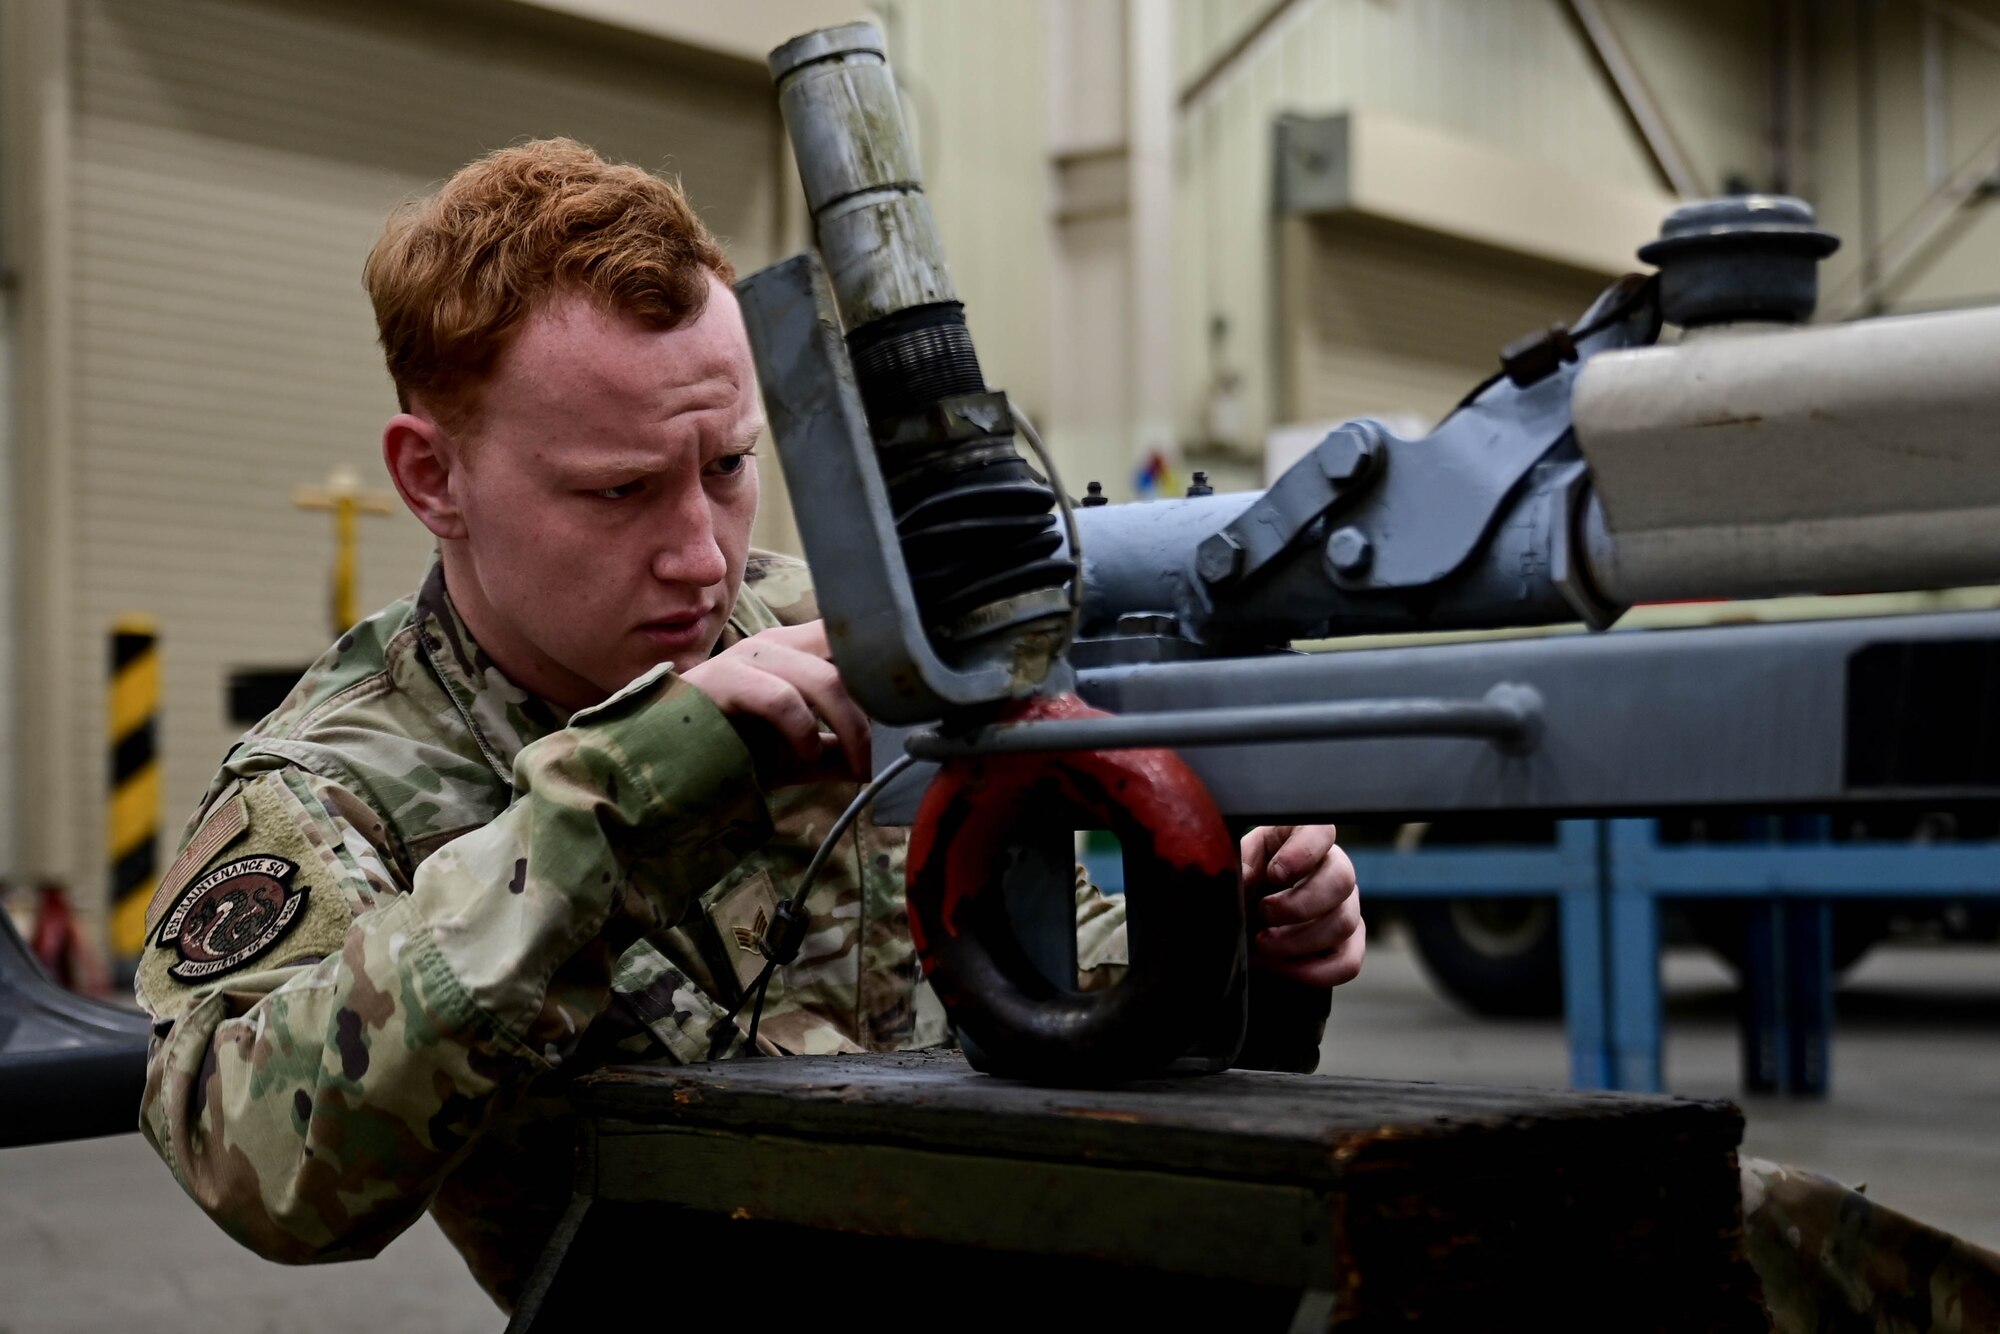 Senior Airman Raymond Taulbee, 8th Maintenance Squadron munitions systems equipment maintenance technician, inspects the tow hitch of a munitions trailer at Kunsan Air Base, Republic of Korea, Mar 15, 2023.